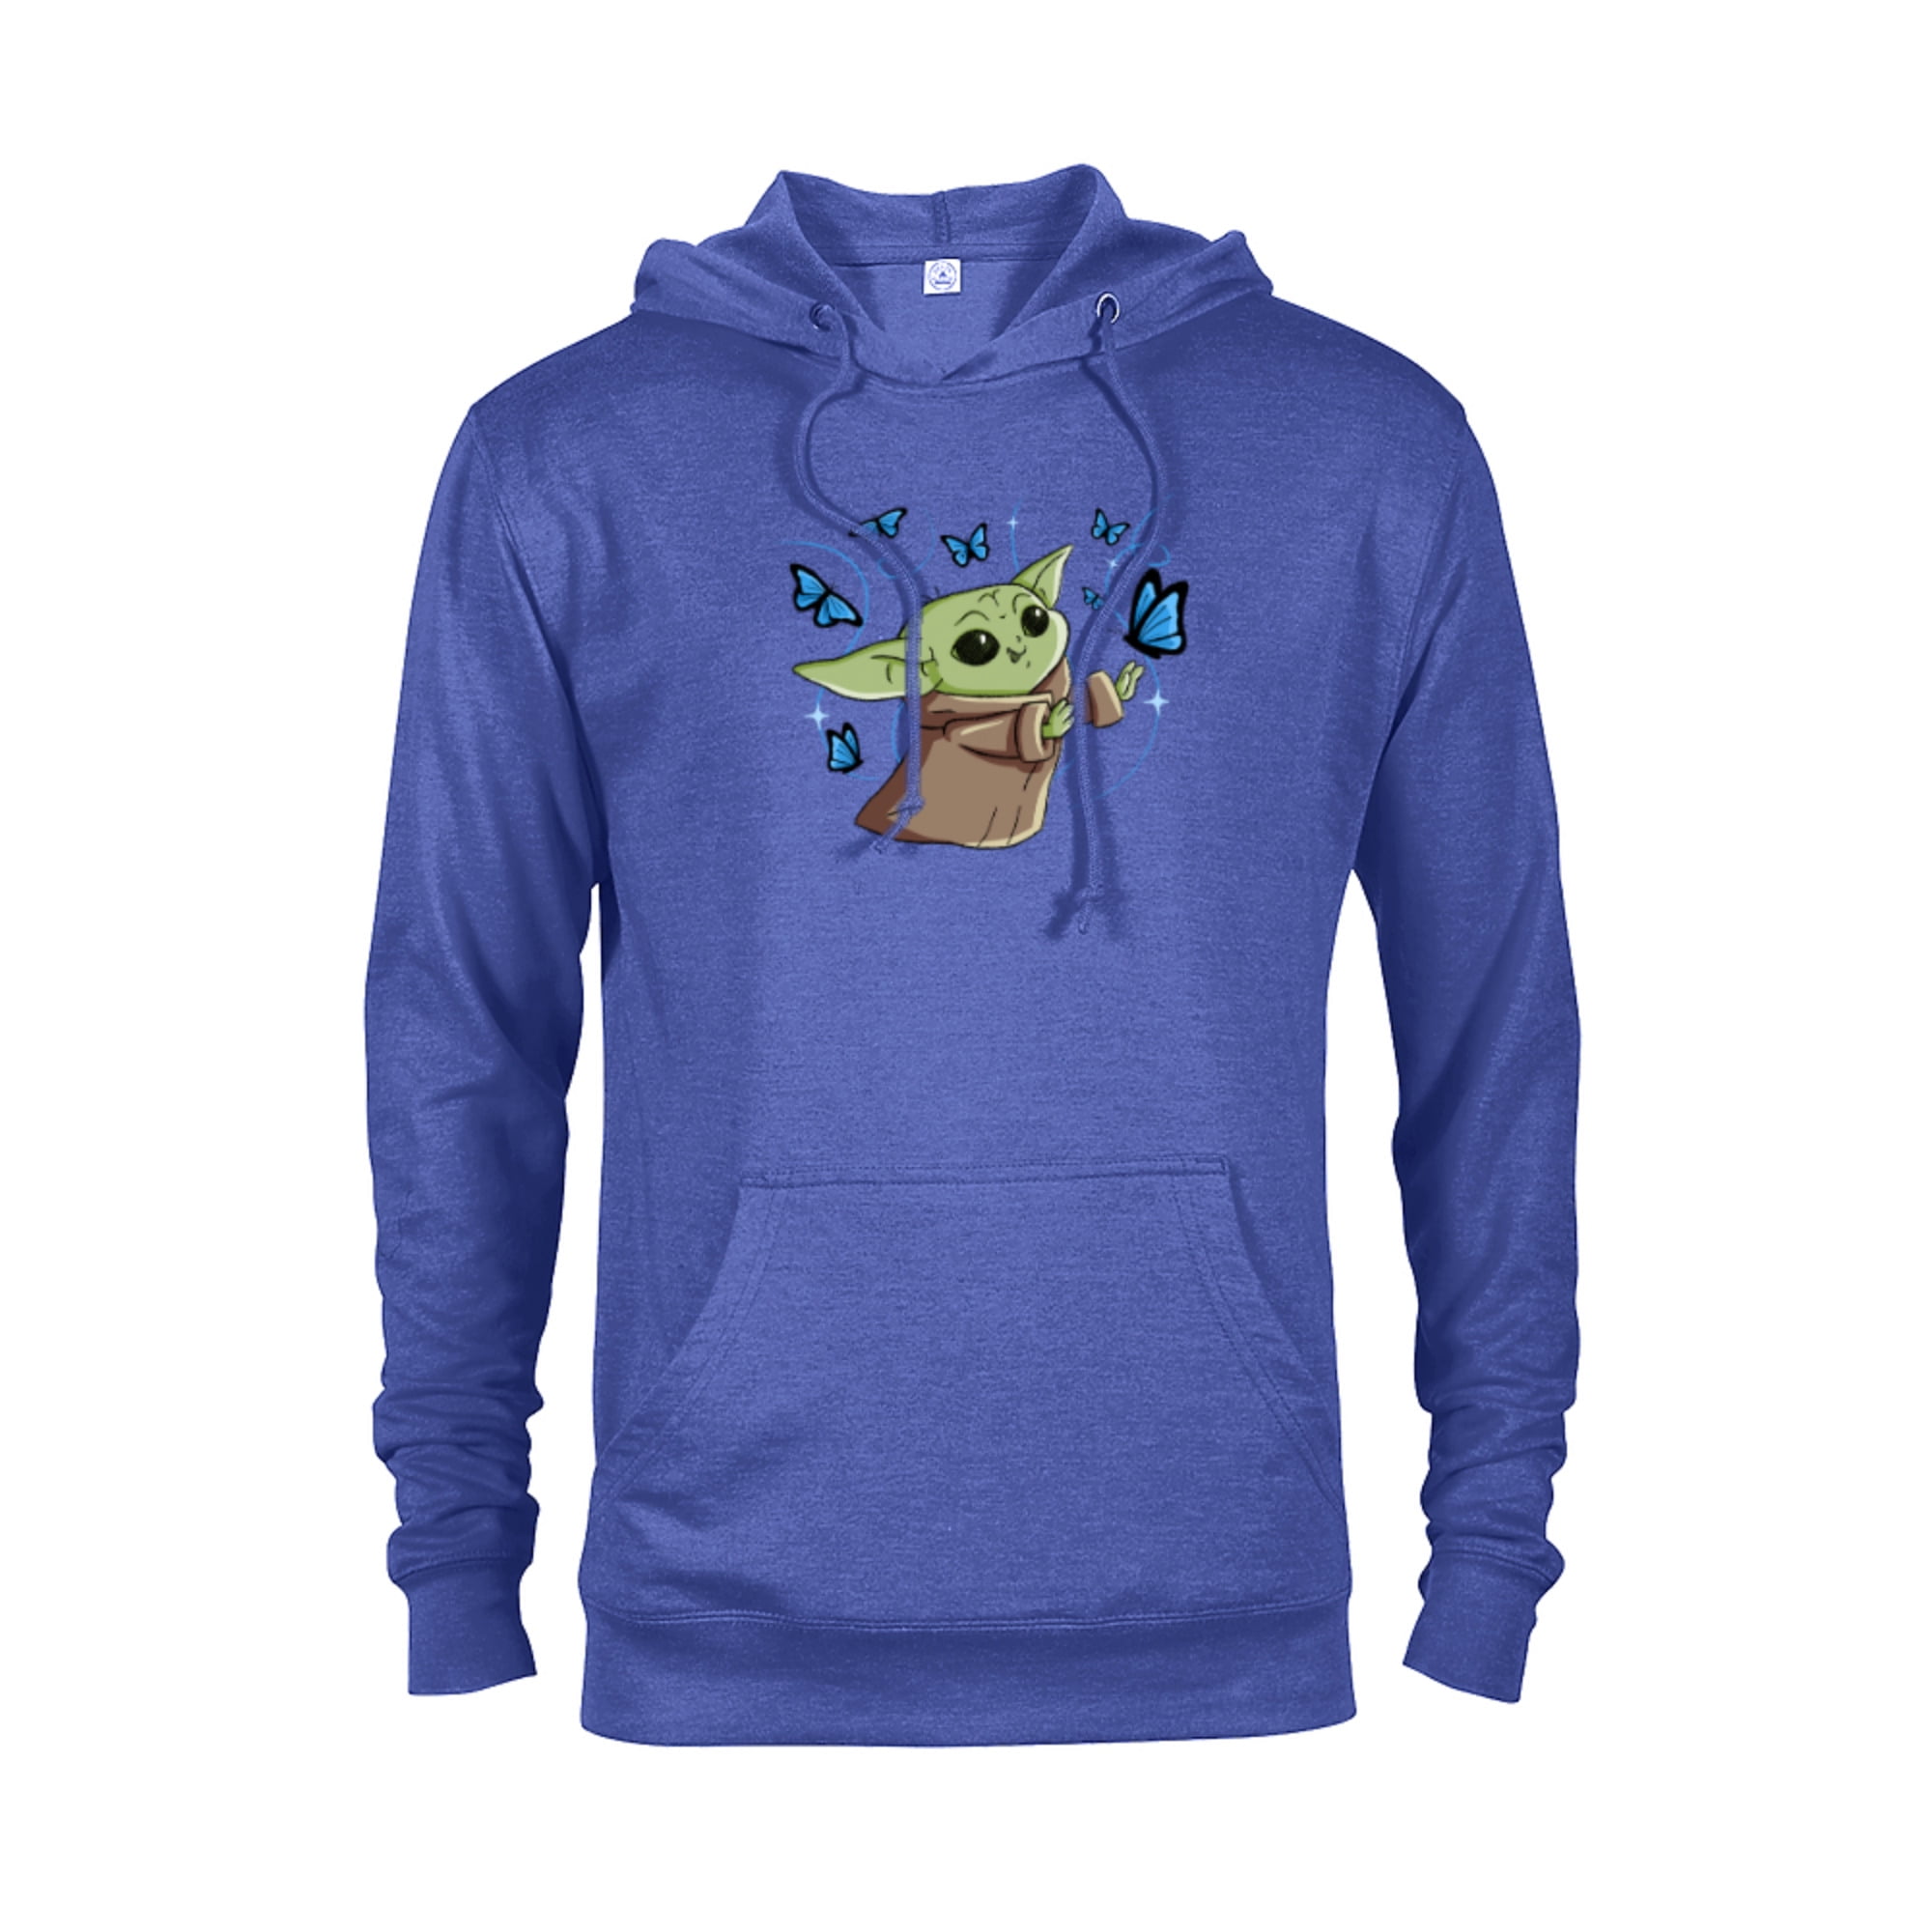 Pullover Heather - for with - Hoodie Customized-Royal The Mandalorian Blue Star Wars Butterflies Adults The Child